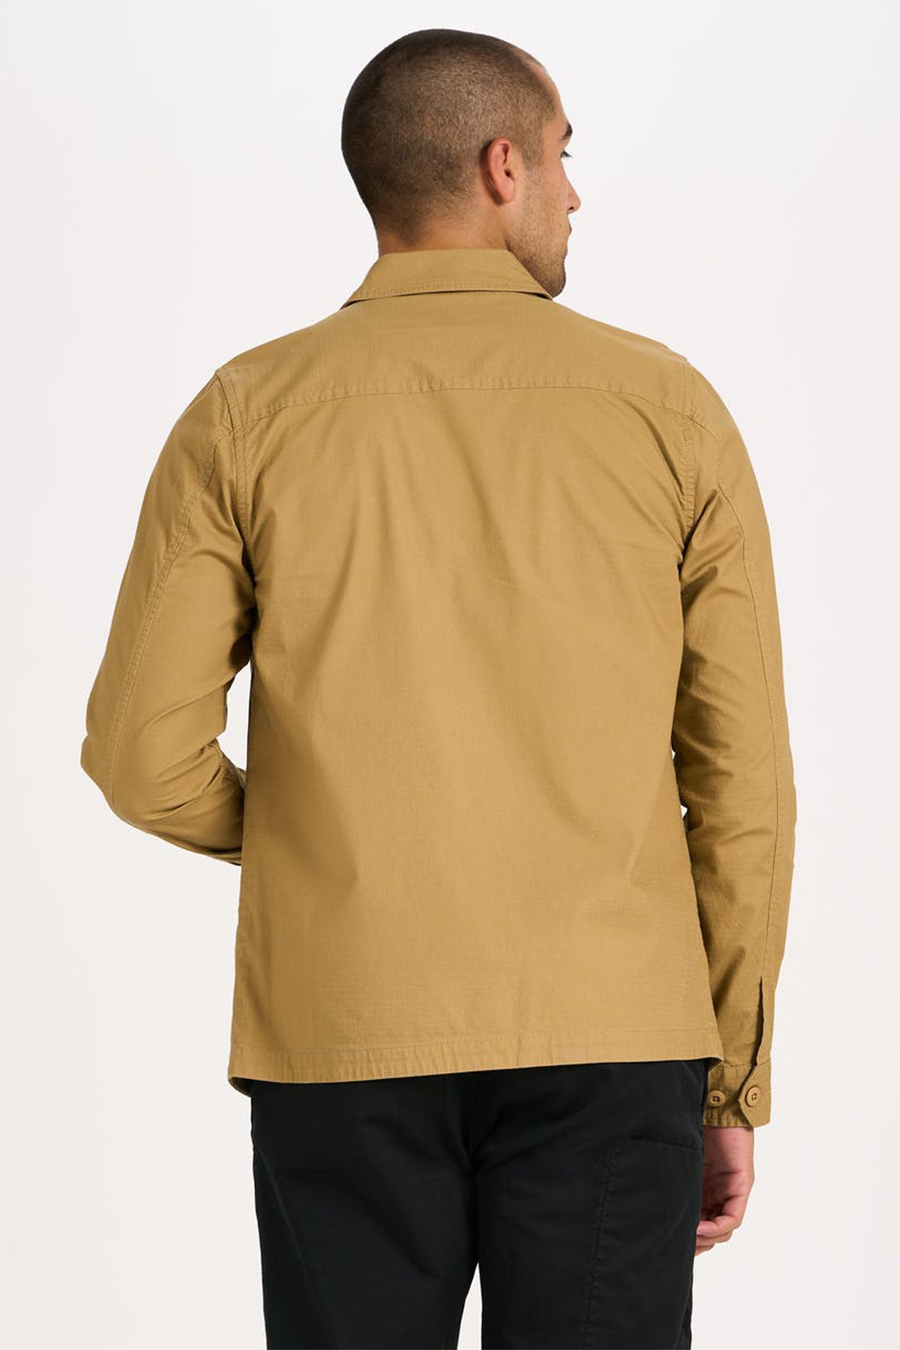 Ripstop Jacket | Wheat - Main Image Number 2 of 2